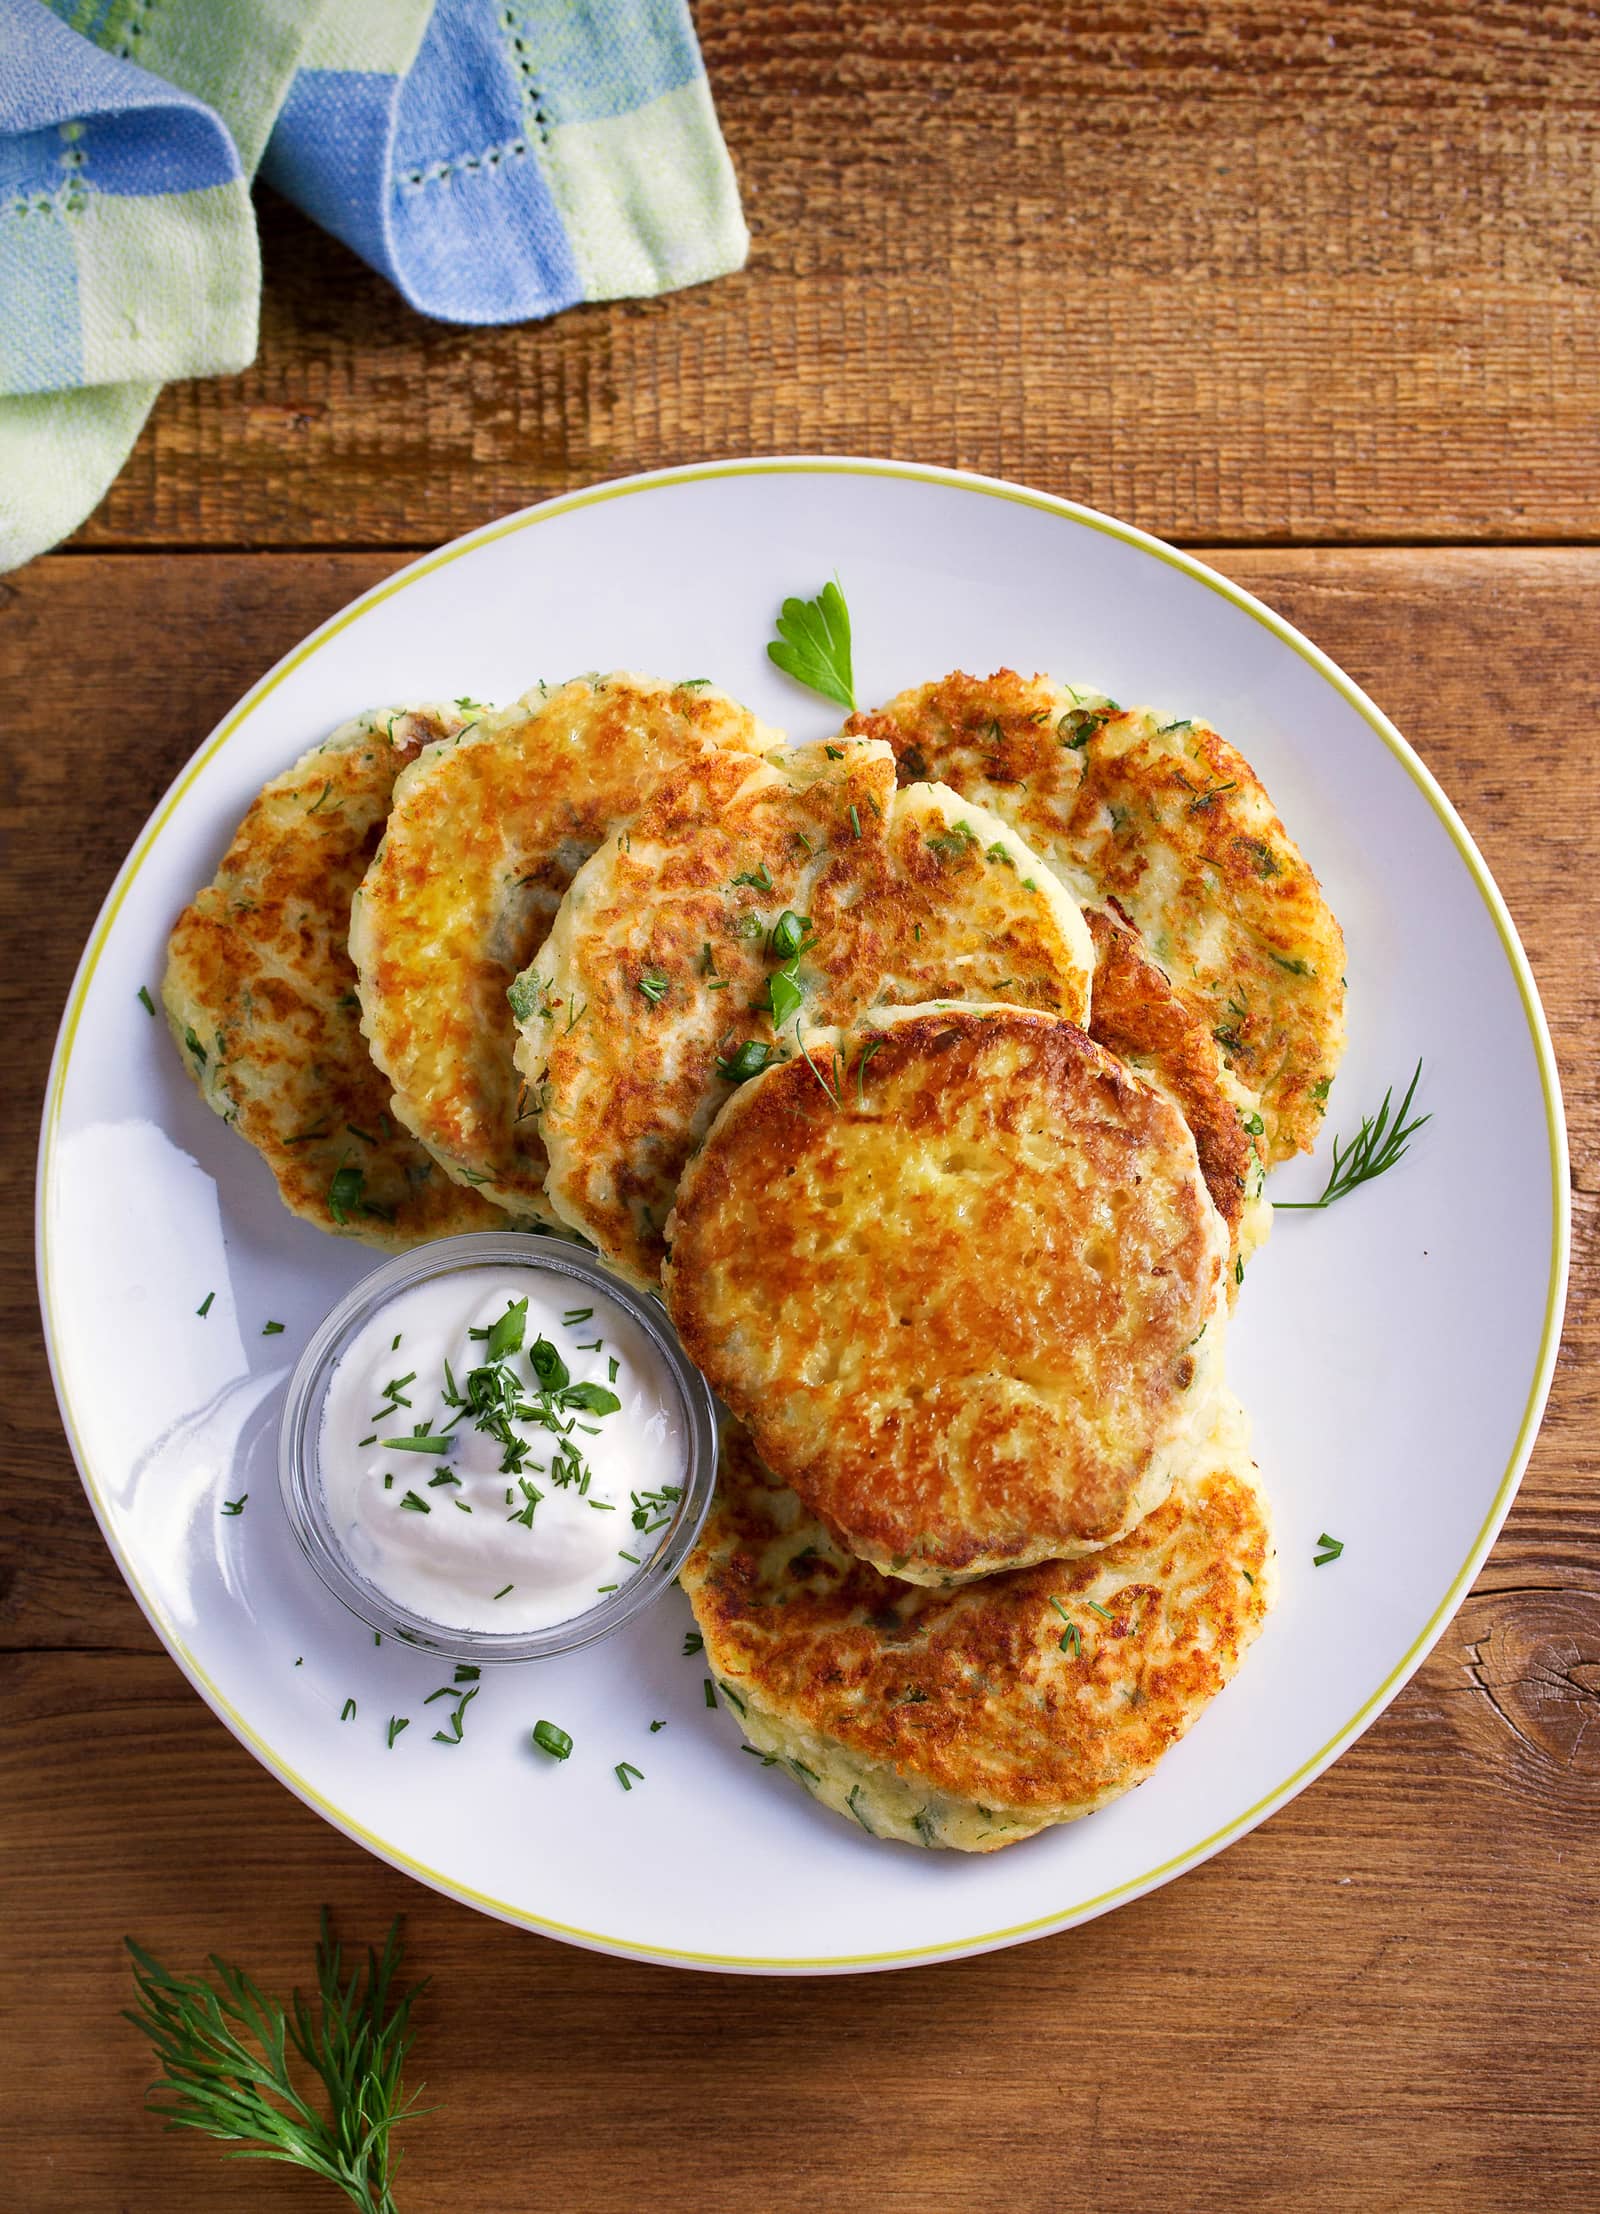 Discover more than 131 grated potato cakes super hot - awesomeenglish ...